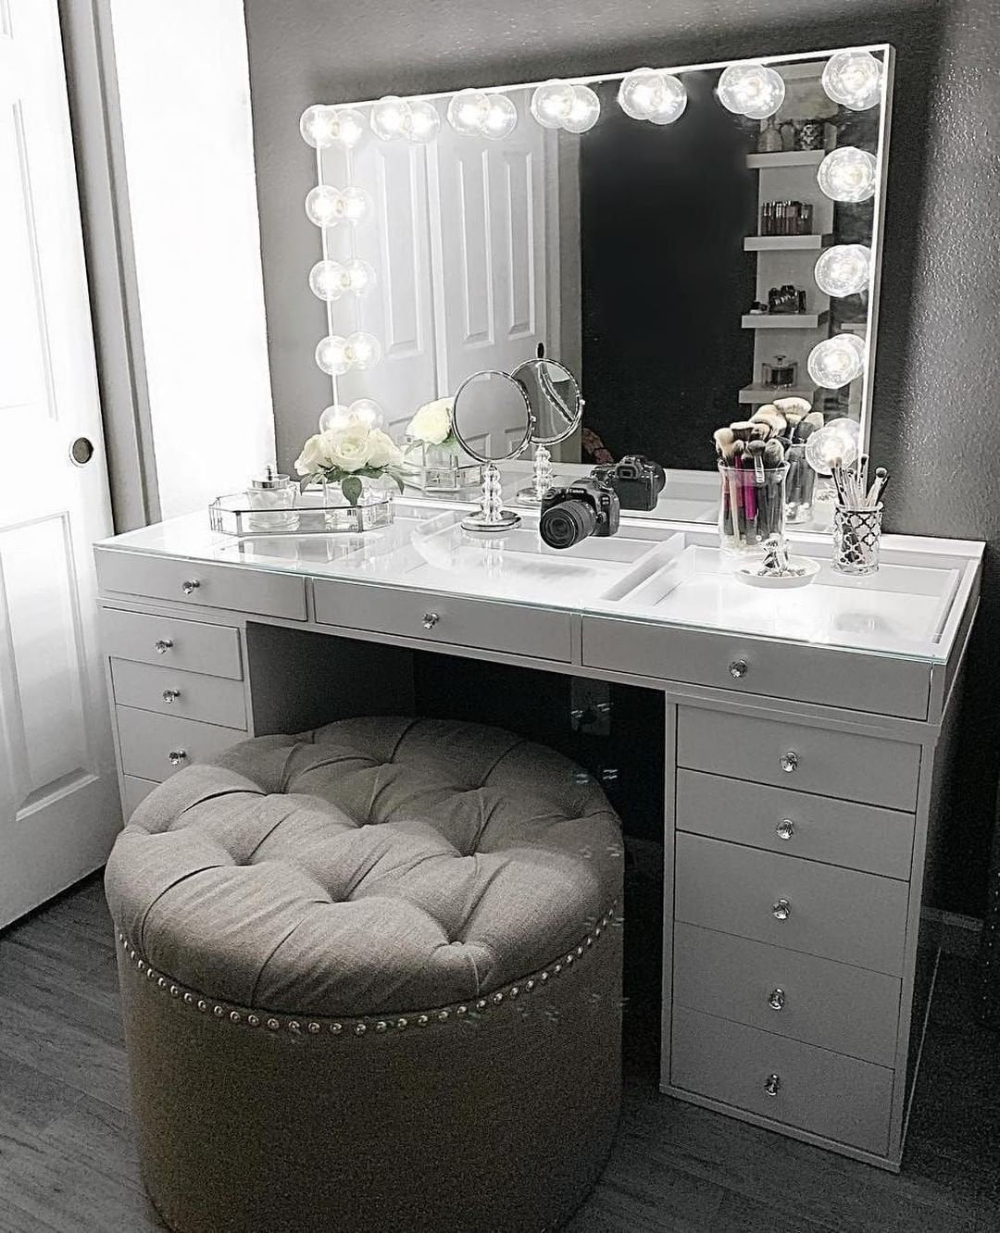 Hollywood Makeup Vanity Mirror with Lights-Impressions Vanity Glow Pro Makeup Vanity Mirror with Dimmer Lights for Tabletop or Wall Mounted - Hollywood Makeup Vanity Mirror with Lights-Impressions Vanity Glow Pro Makeup Vanity Mirror with Dimmer Lights for Tabletop or Wall Mounted -   16 black beauty Room ideas